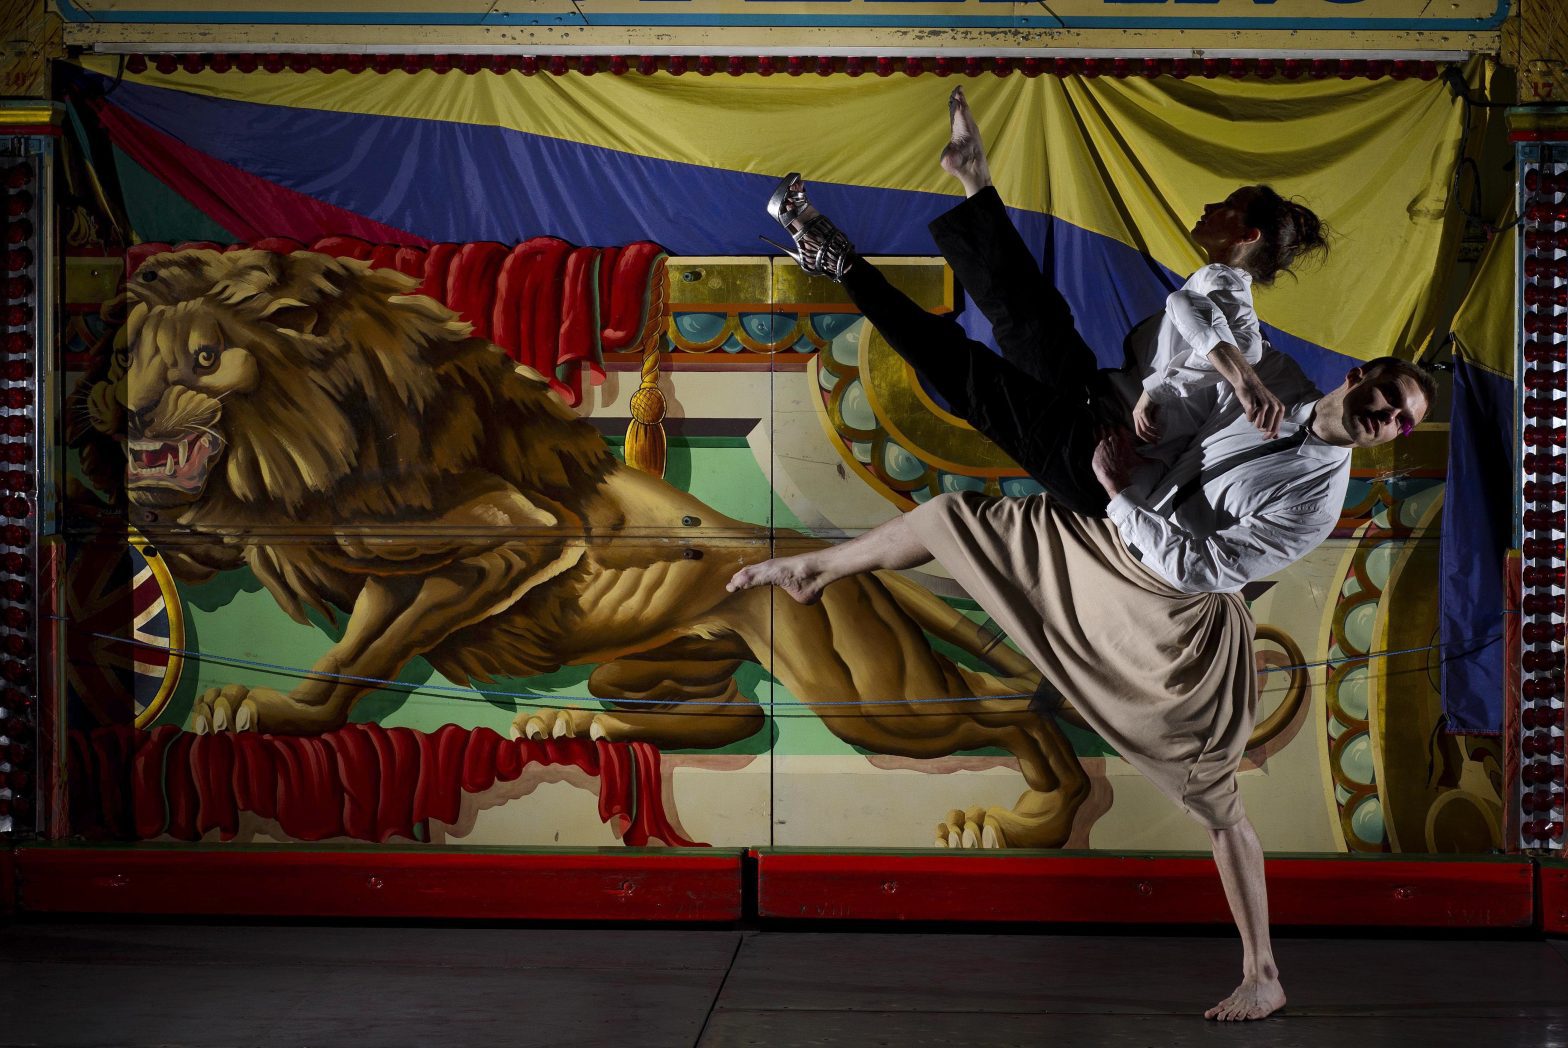 A man is lifting a woman up into the air in a dance move where both her legs are pointed to the ceiling and her arms are outstretched. Behind them a tapestry of a painting hangs from the ceiling.